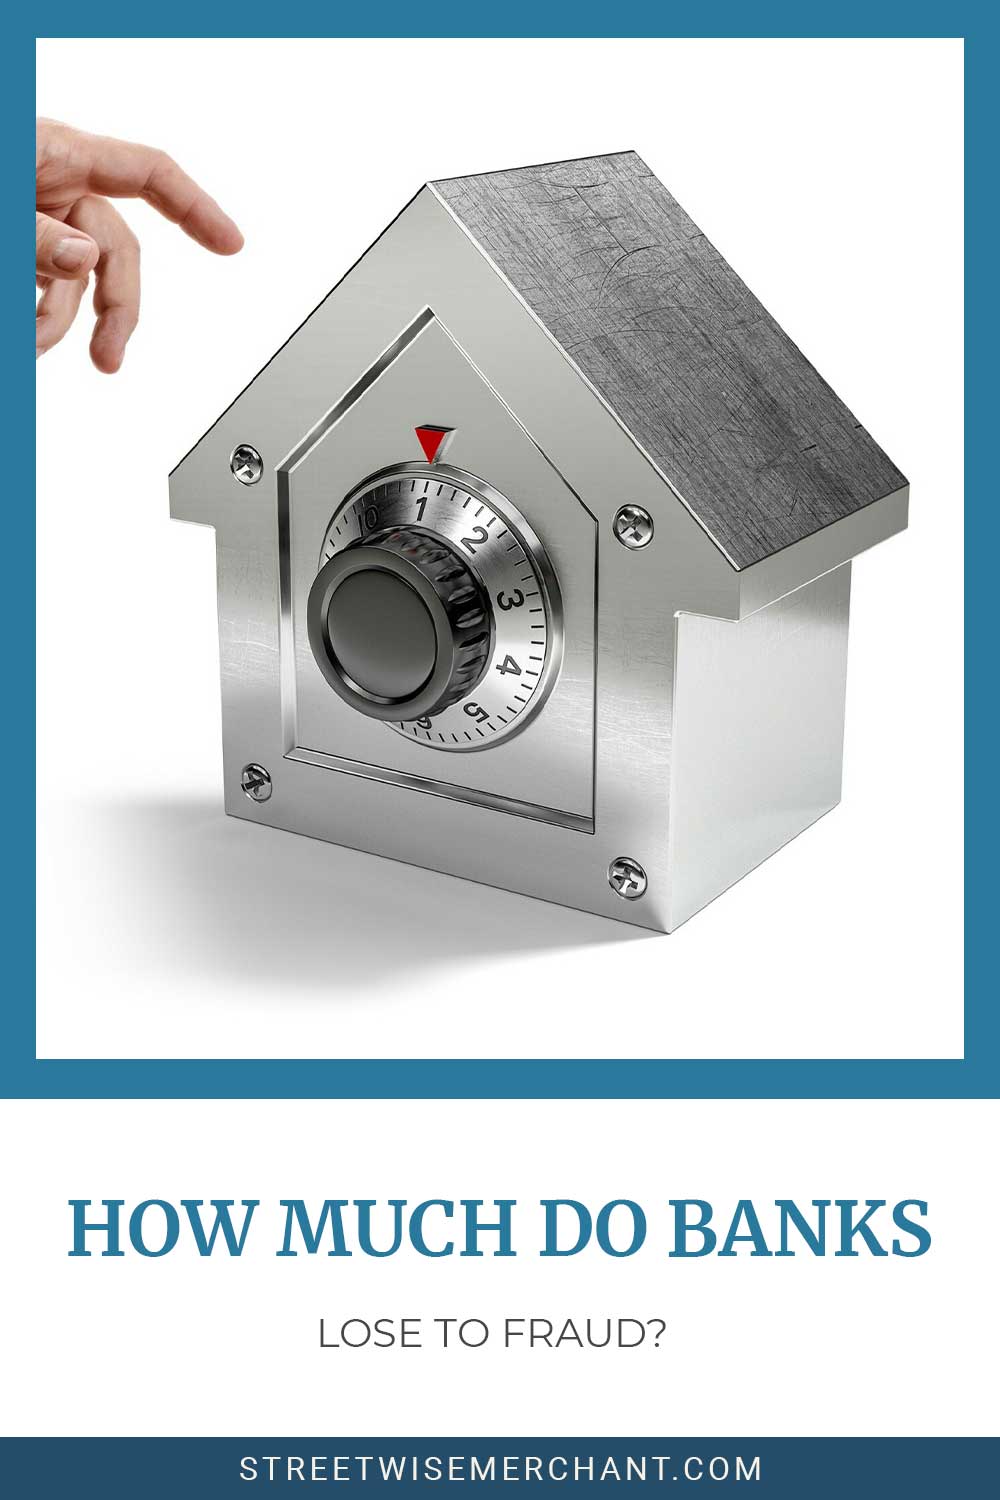 A metal thing and a human hand toward it - How Much Do Banks Lose to Fraud?